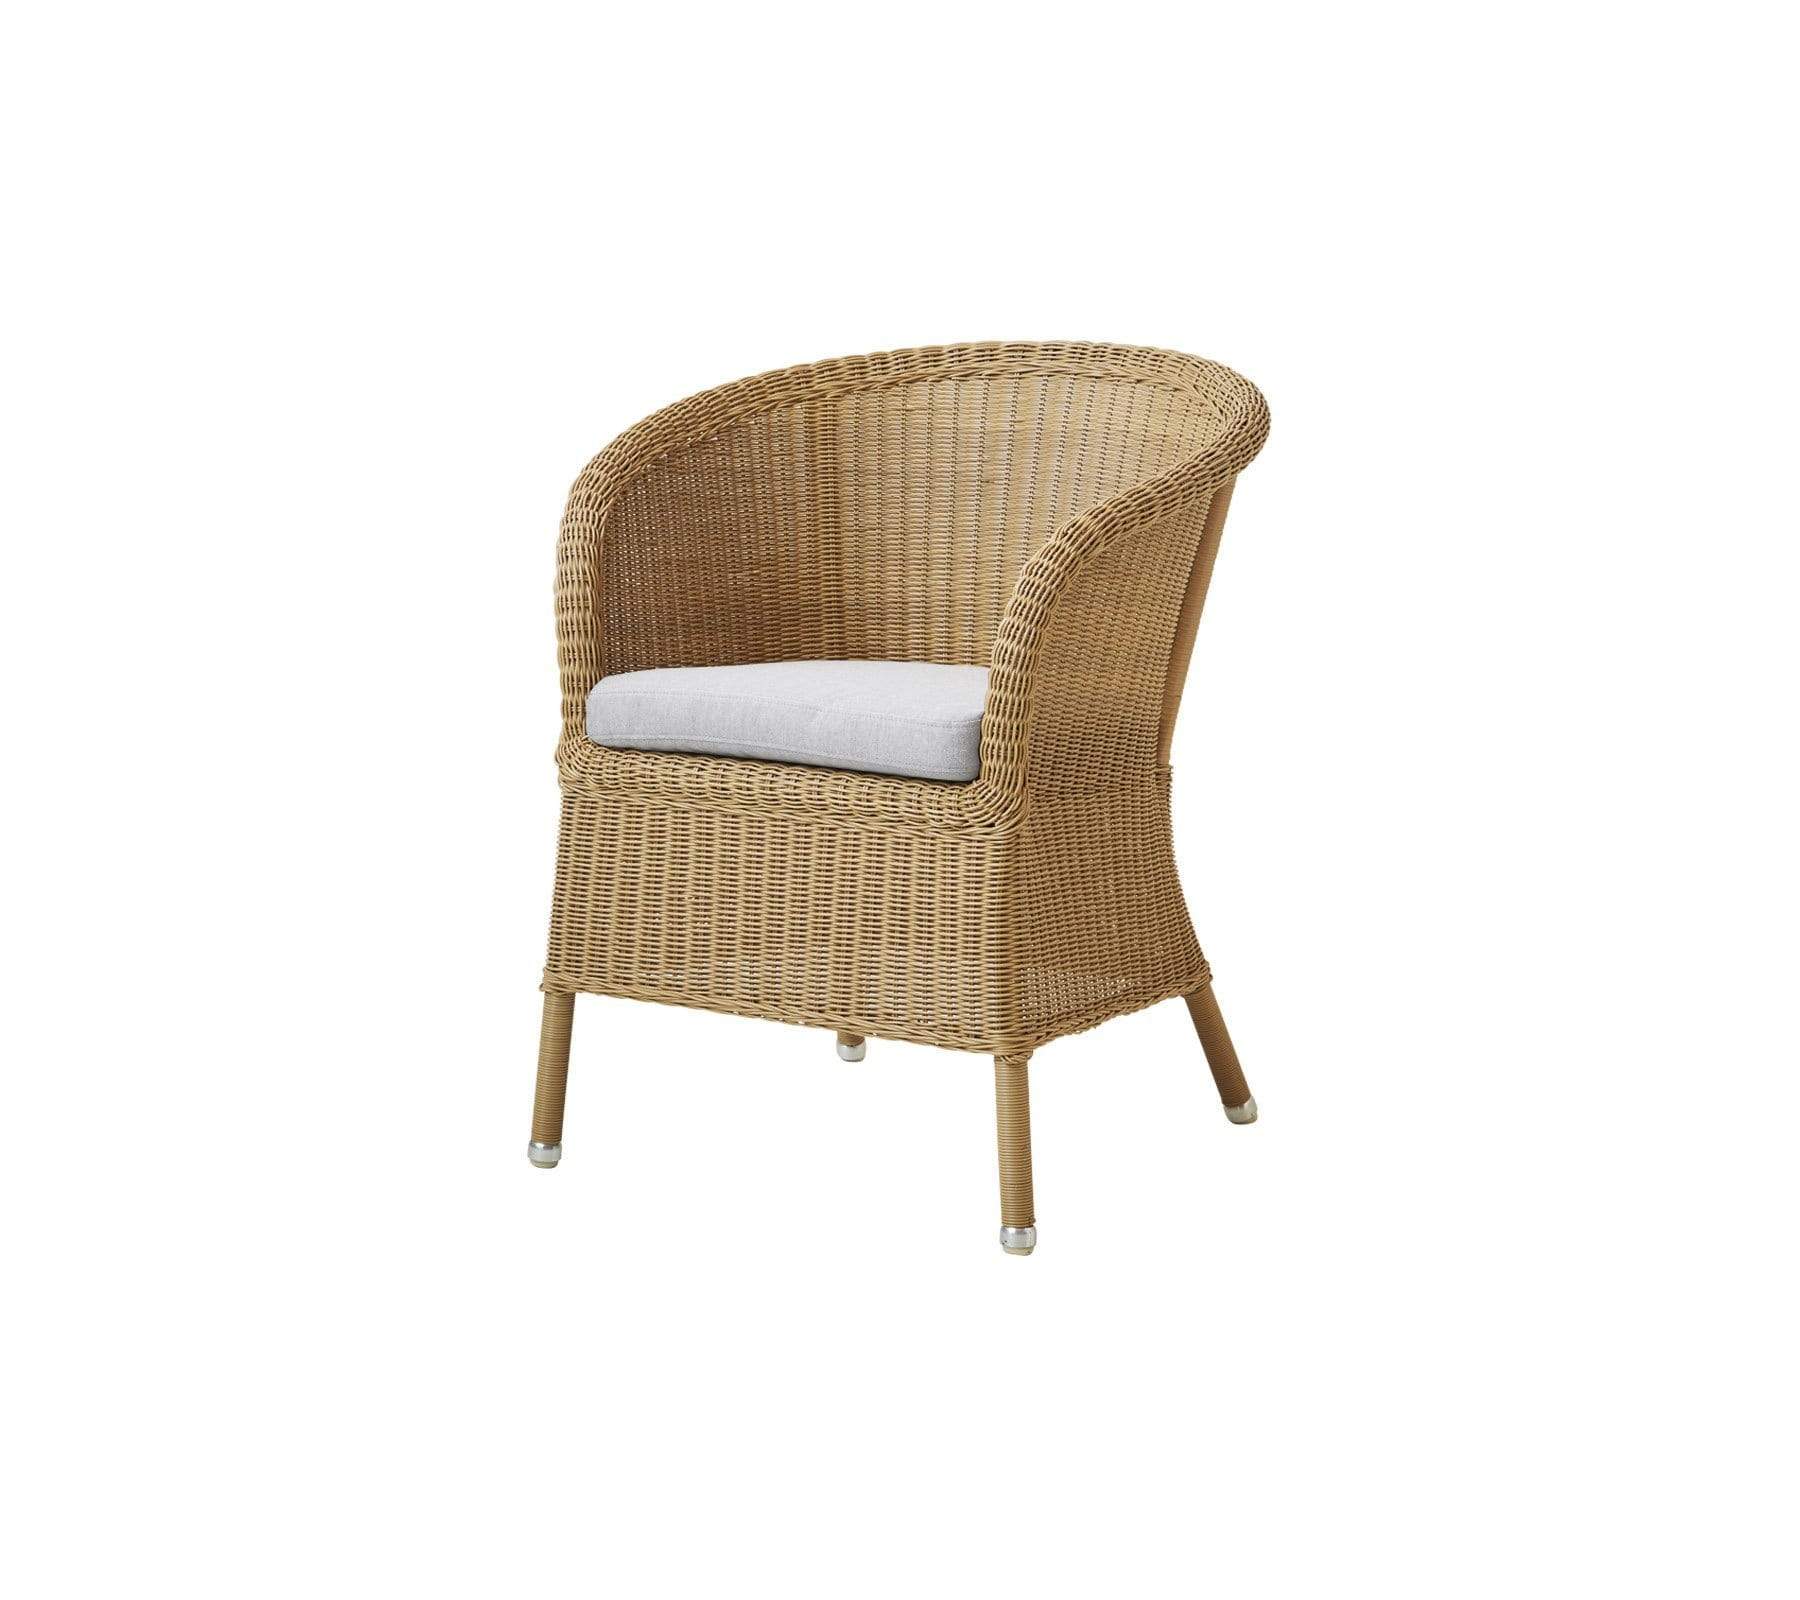 Boxhill's Derby Outdoor Dining Armchair with light grey seat cushion